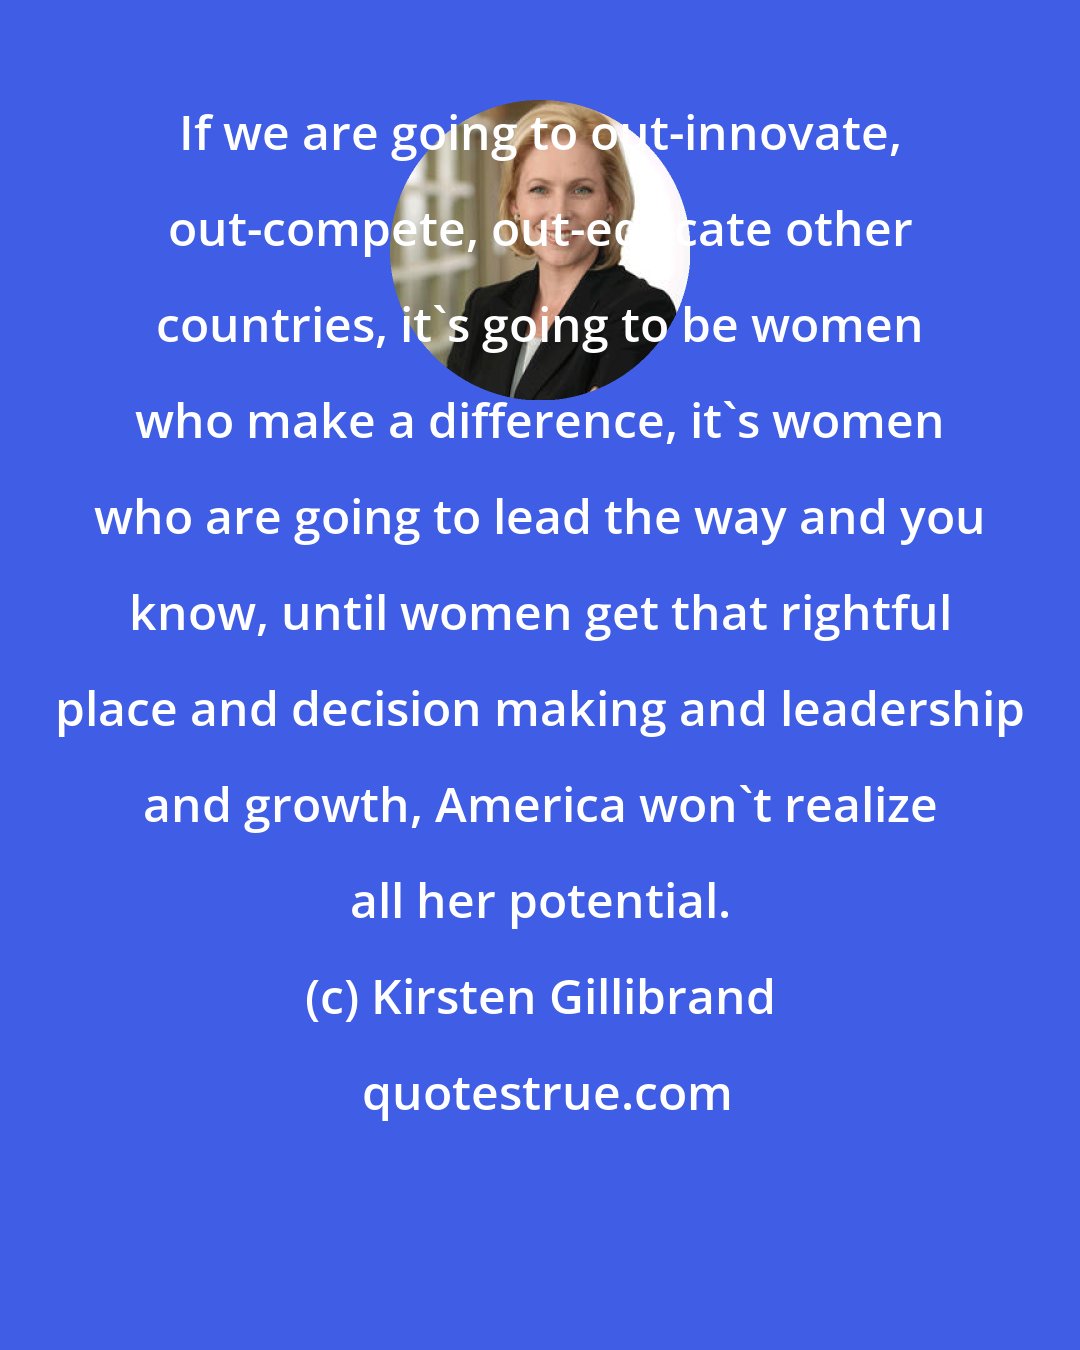 Kirsten Gillibrand: If we are going to out-innovate, out-compete, out-educate other countries, it's going to be women who make a difference, it's women who are going to lead the way and you know, until women get that rightful place and decision making and leadership and growth, America won't realize all her potential.